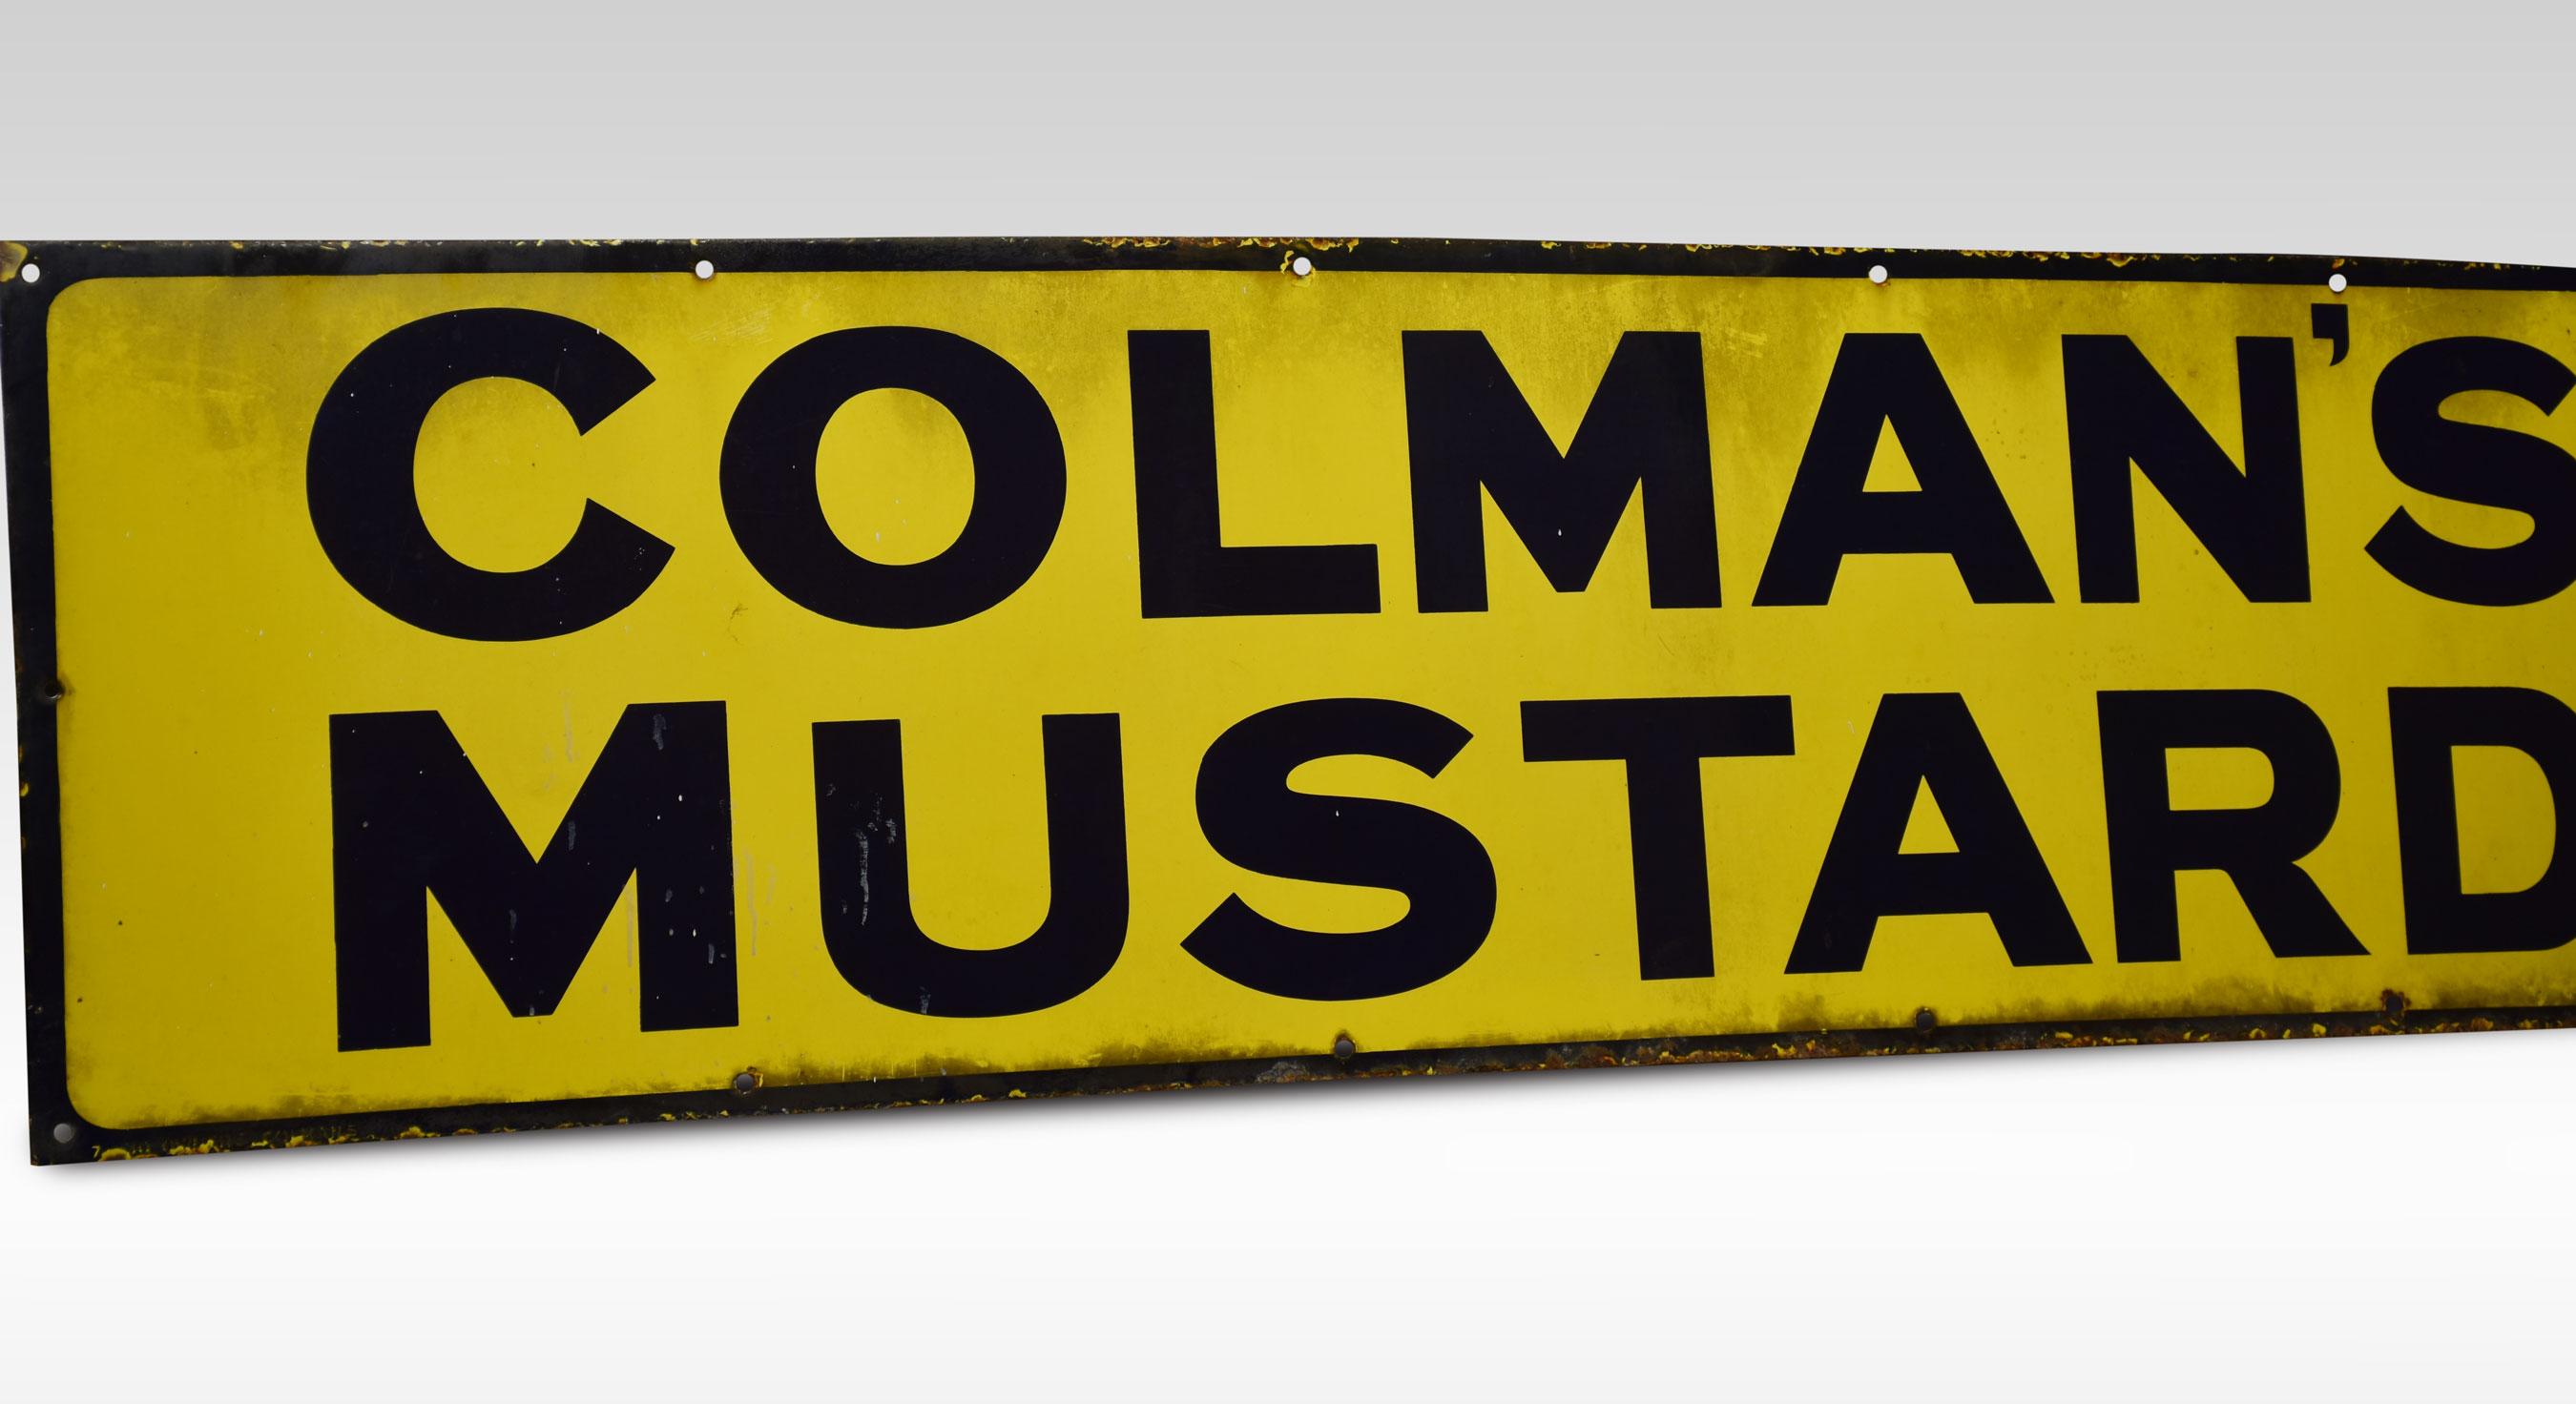 Enamel sign for Colman’s Mustard, of rectangular form decorated in blue and yellow enamel.
Dimensions
Height 16 inches
Width 62.5 inches
Depth 0.5 inches.